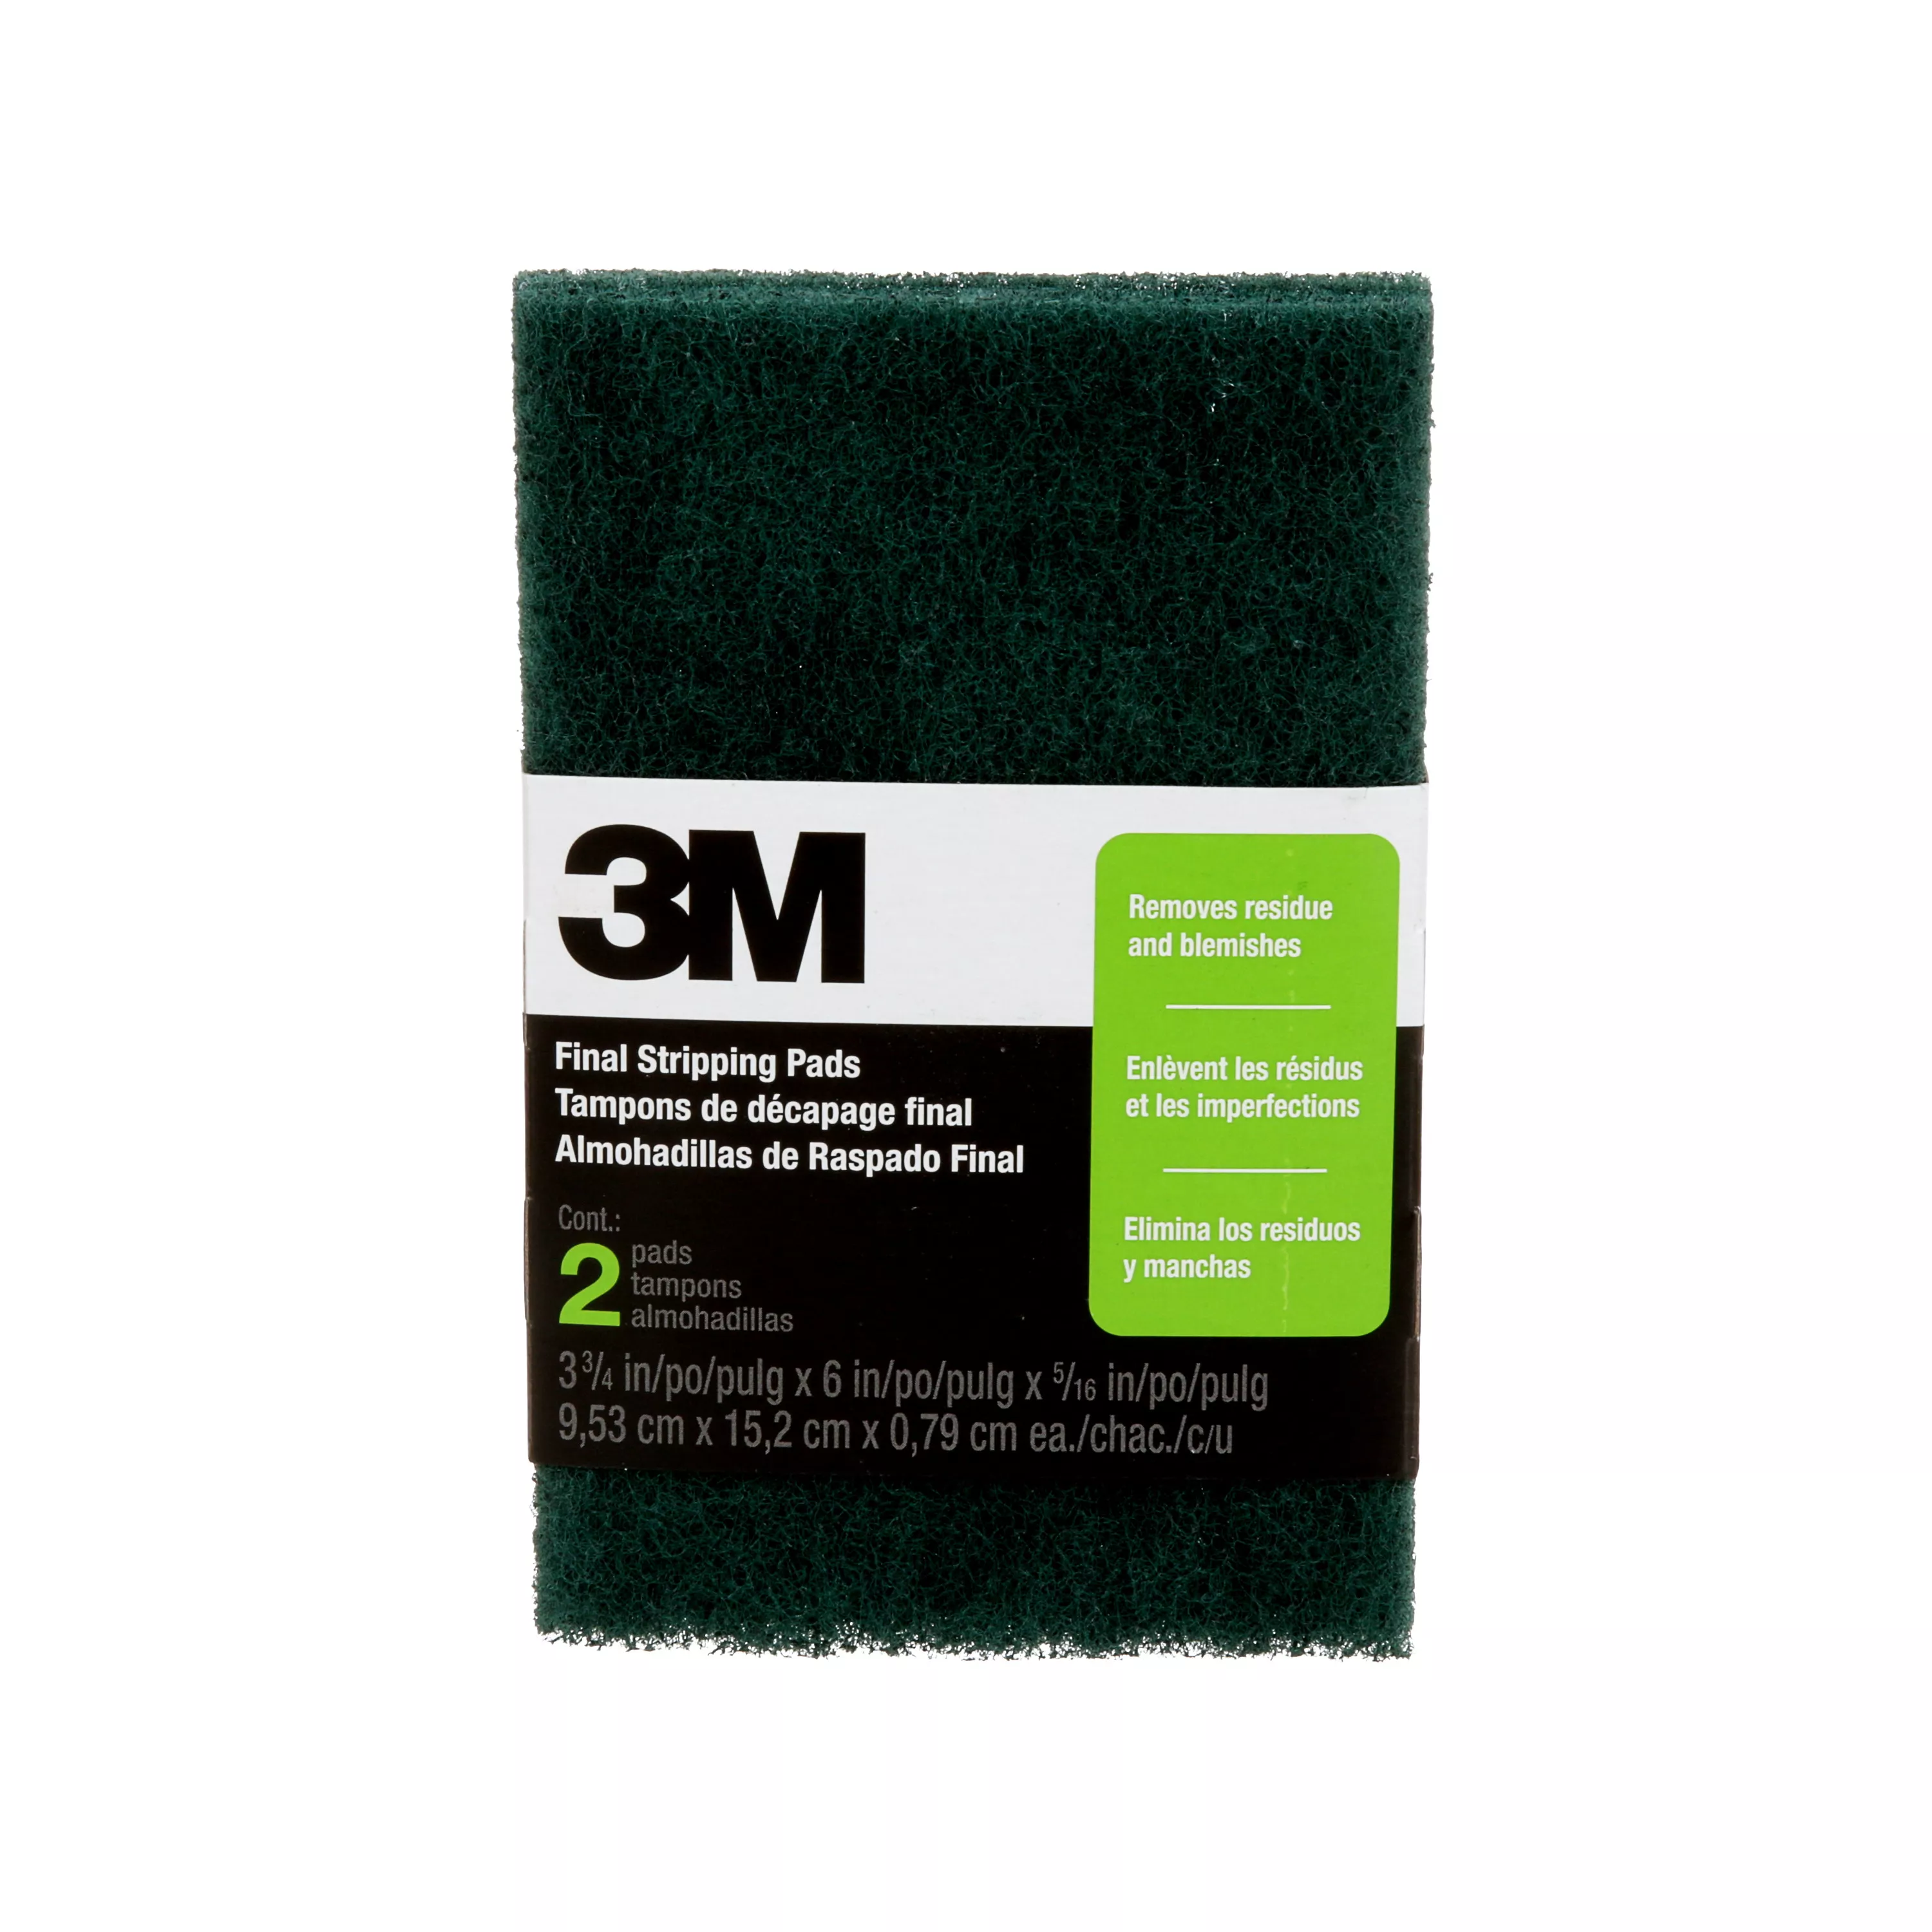 3M™ Final Stripping Pads 10113NA, 0 Fine, Two-pack, Open Stock , 3-3/4
in. x 6 in. x 5/16 in. each